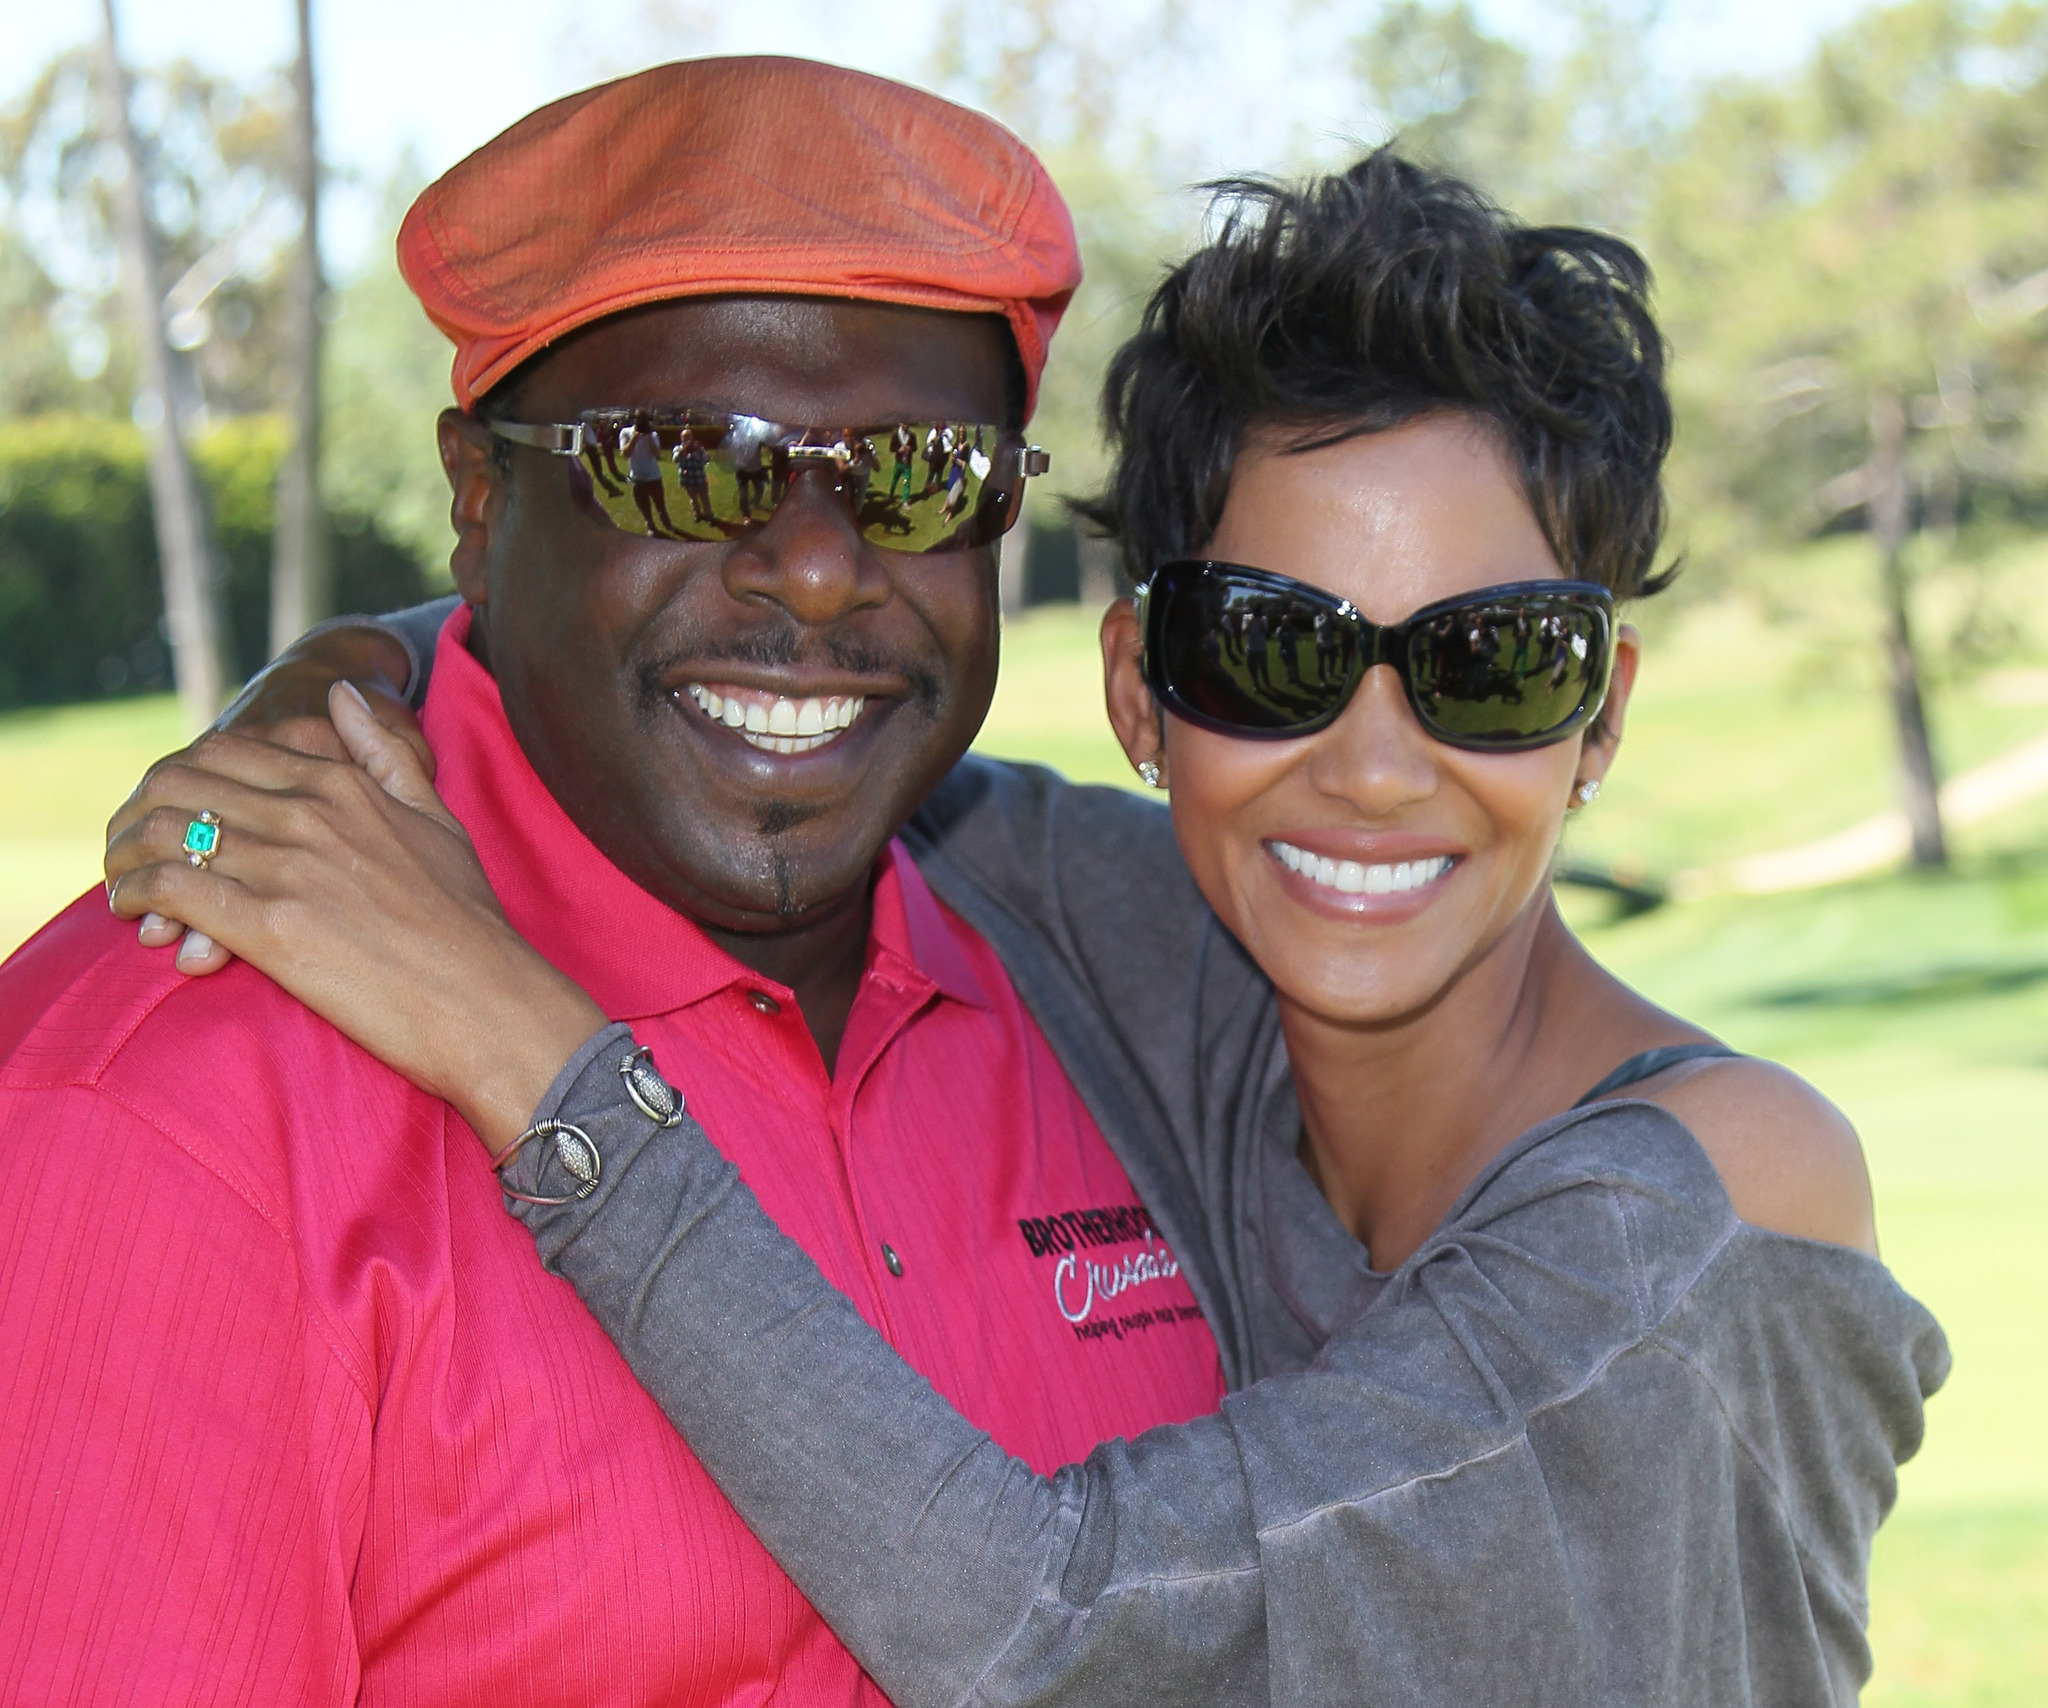 Halle Berry and Cedric the Entertainer